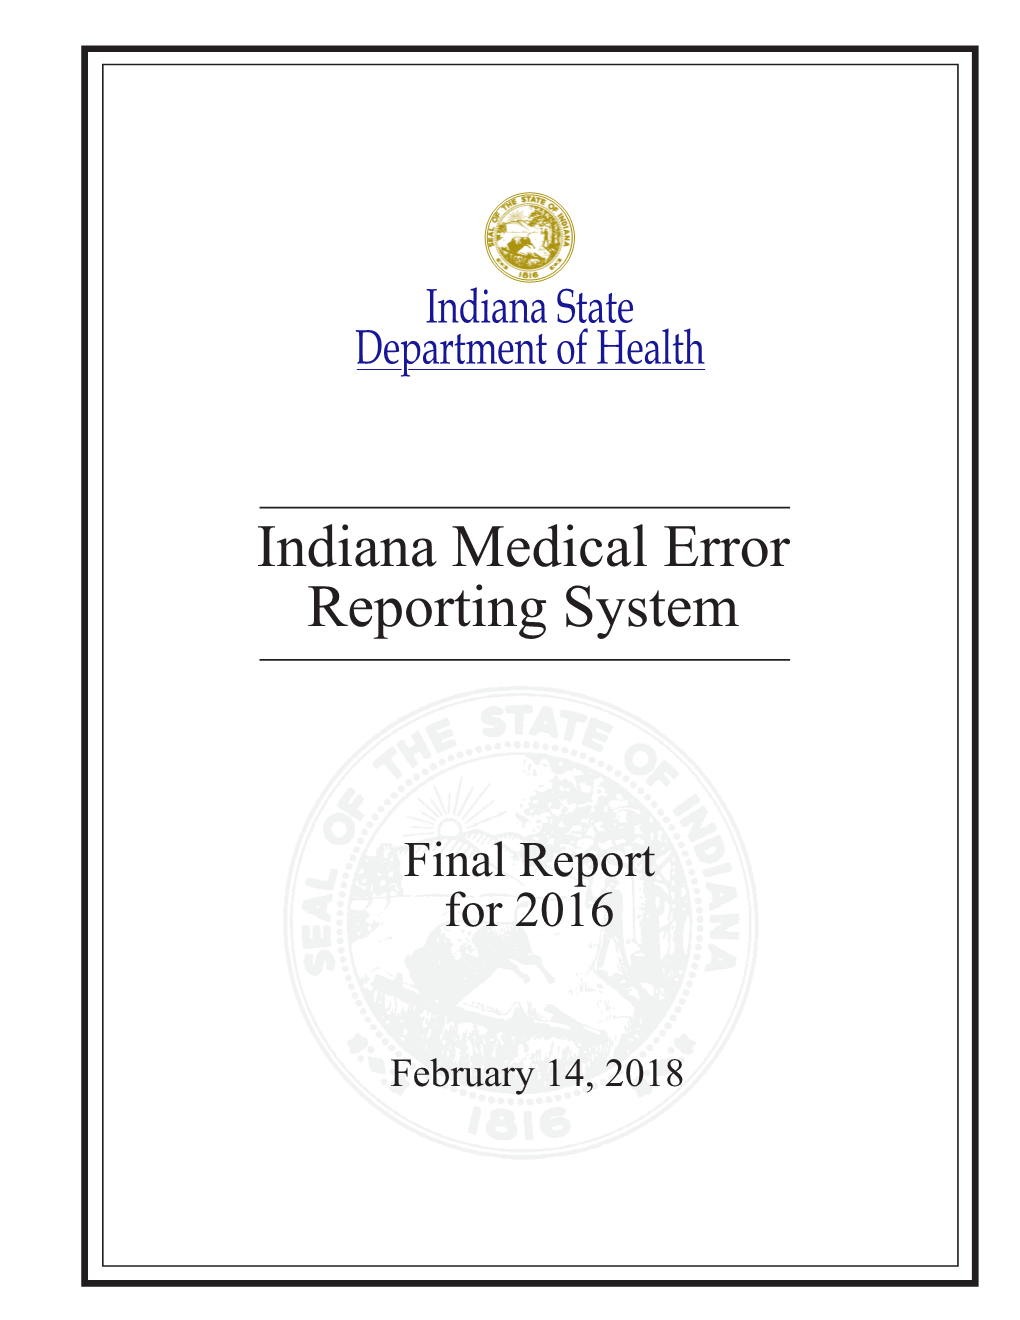 Indiana Medical Error Reporting System